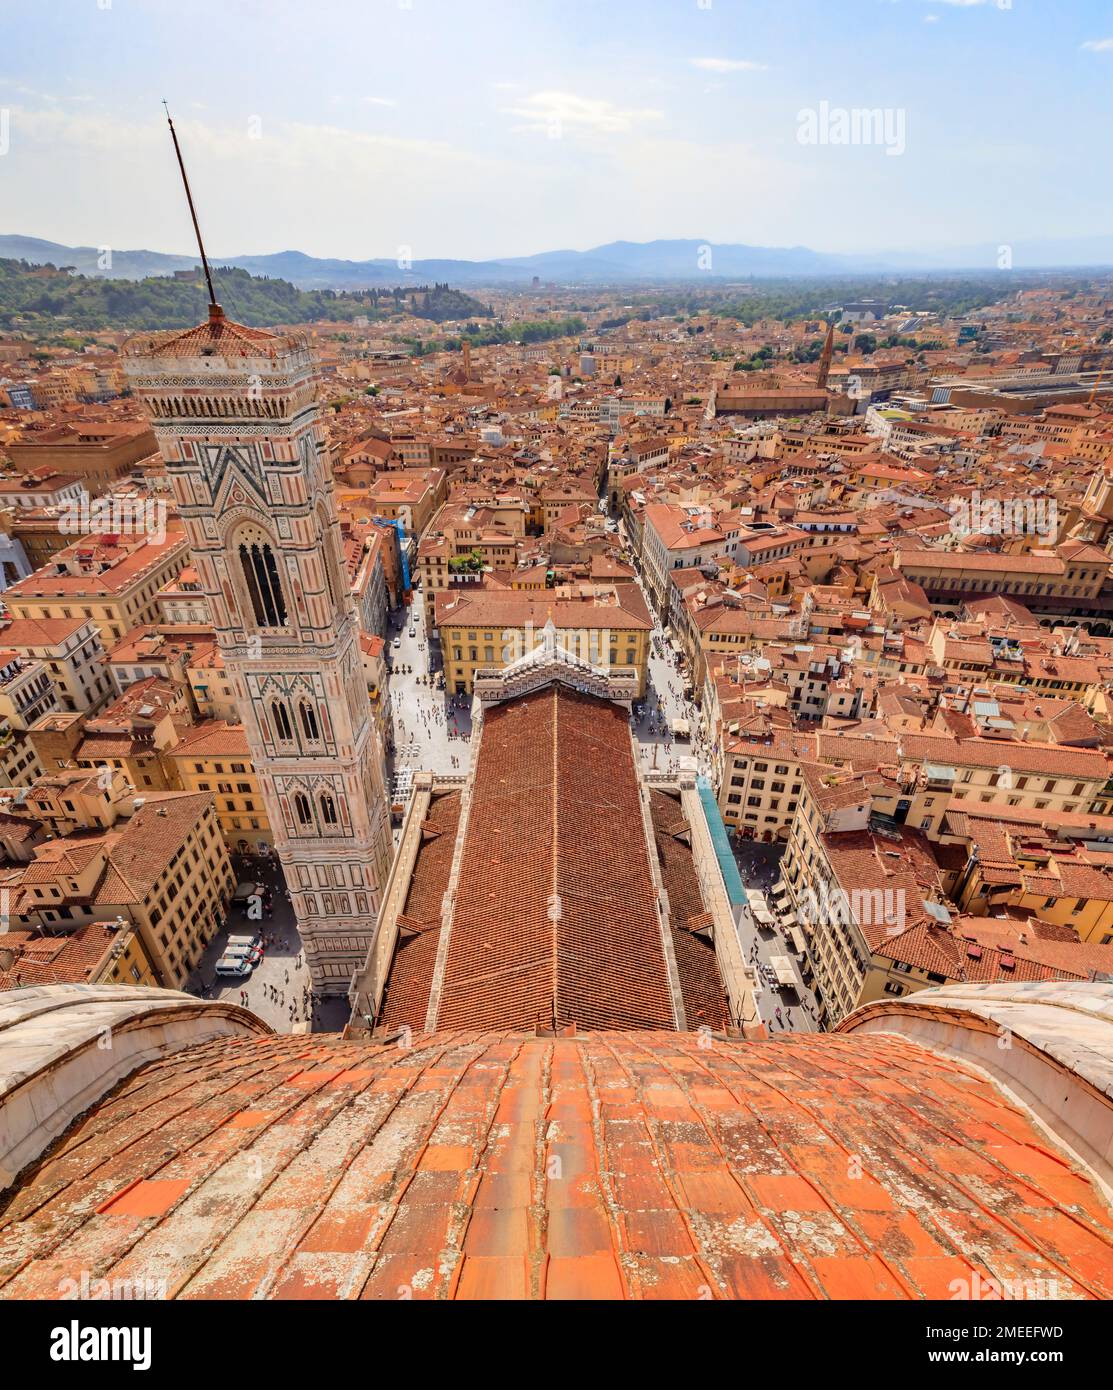 Aerial view of the red tiled Brunelleschi dome of Duomo Cathedral or Cattedrale di Santa Maria del Fiore and Giotto bell tower in Florence, Italy Stock Photo